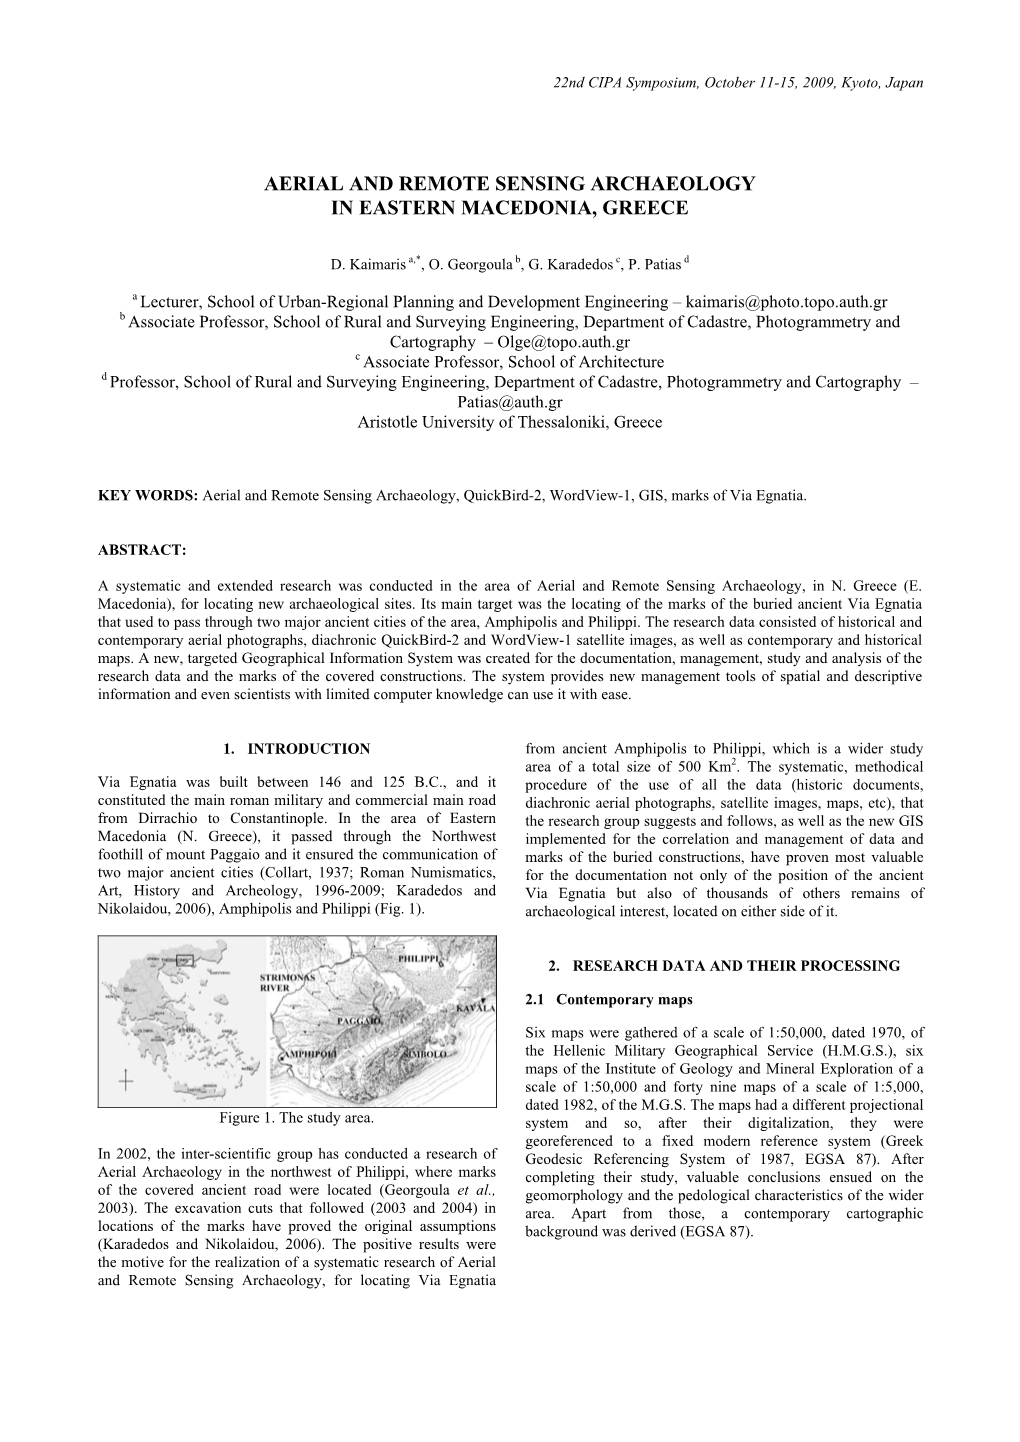 Aerial and Remote Sensing Archaeology in Eastern Macedonia, Greece